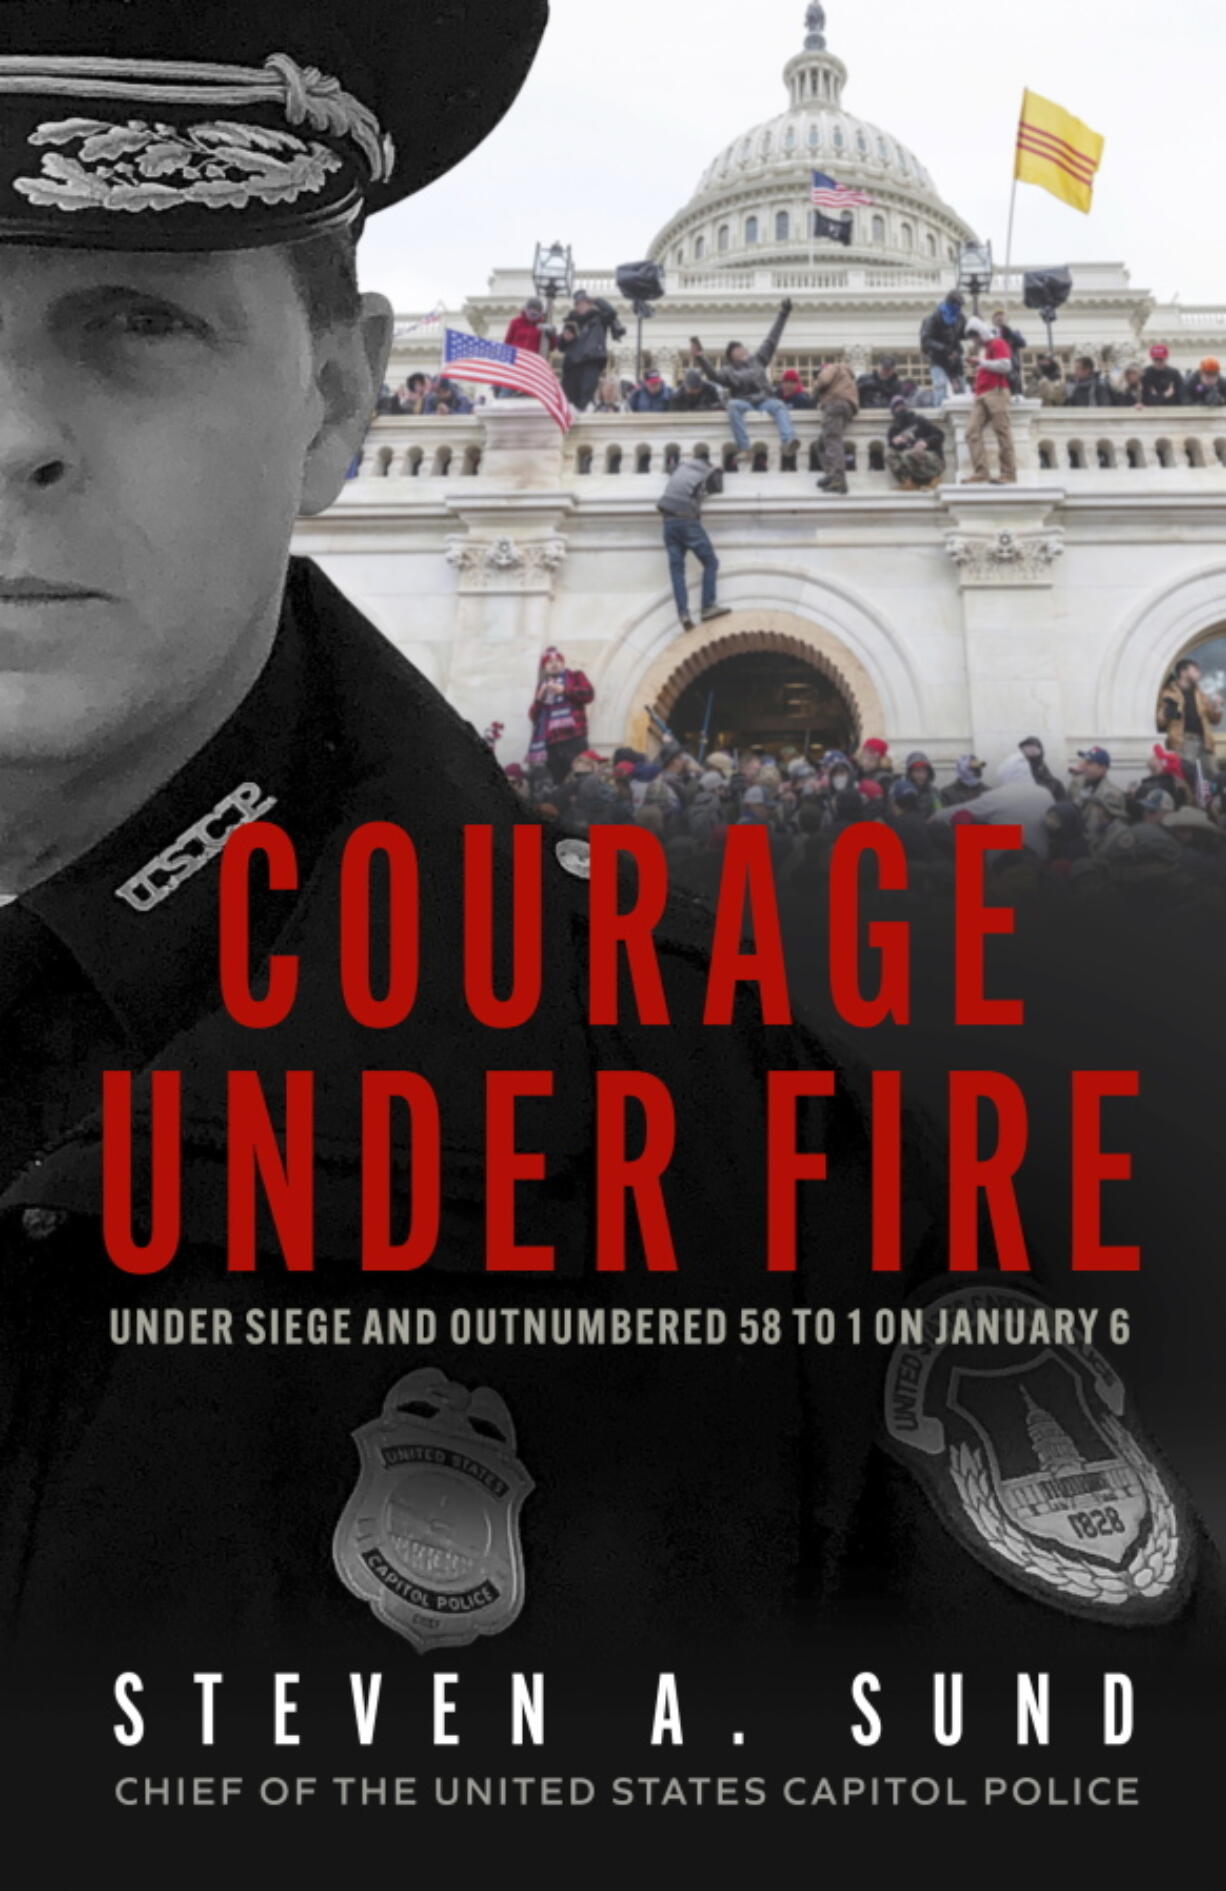 This cover image released by Blackstone Publishing shows "Courage Under Fire: Under Siege and Outnumbered 58 to 1 on January 6" by Steven A. Sund.